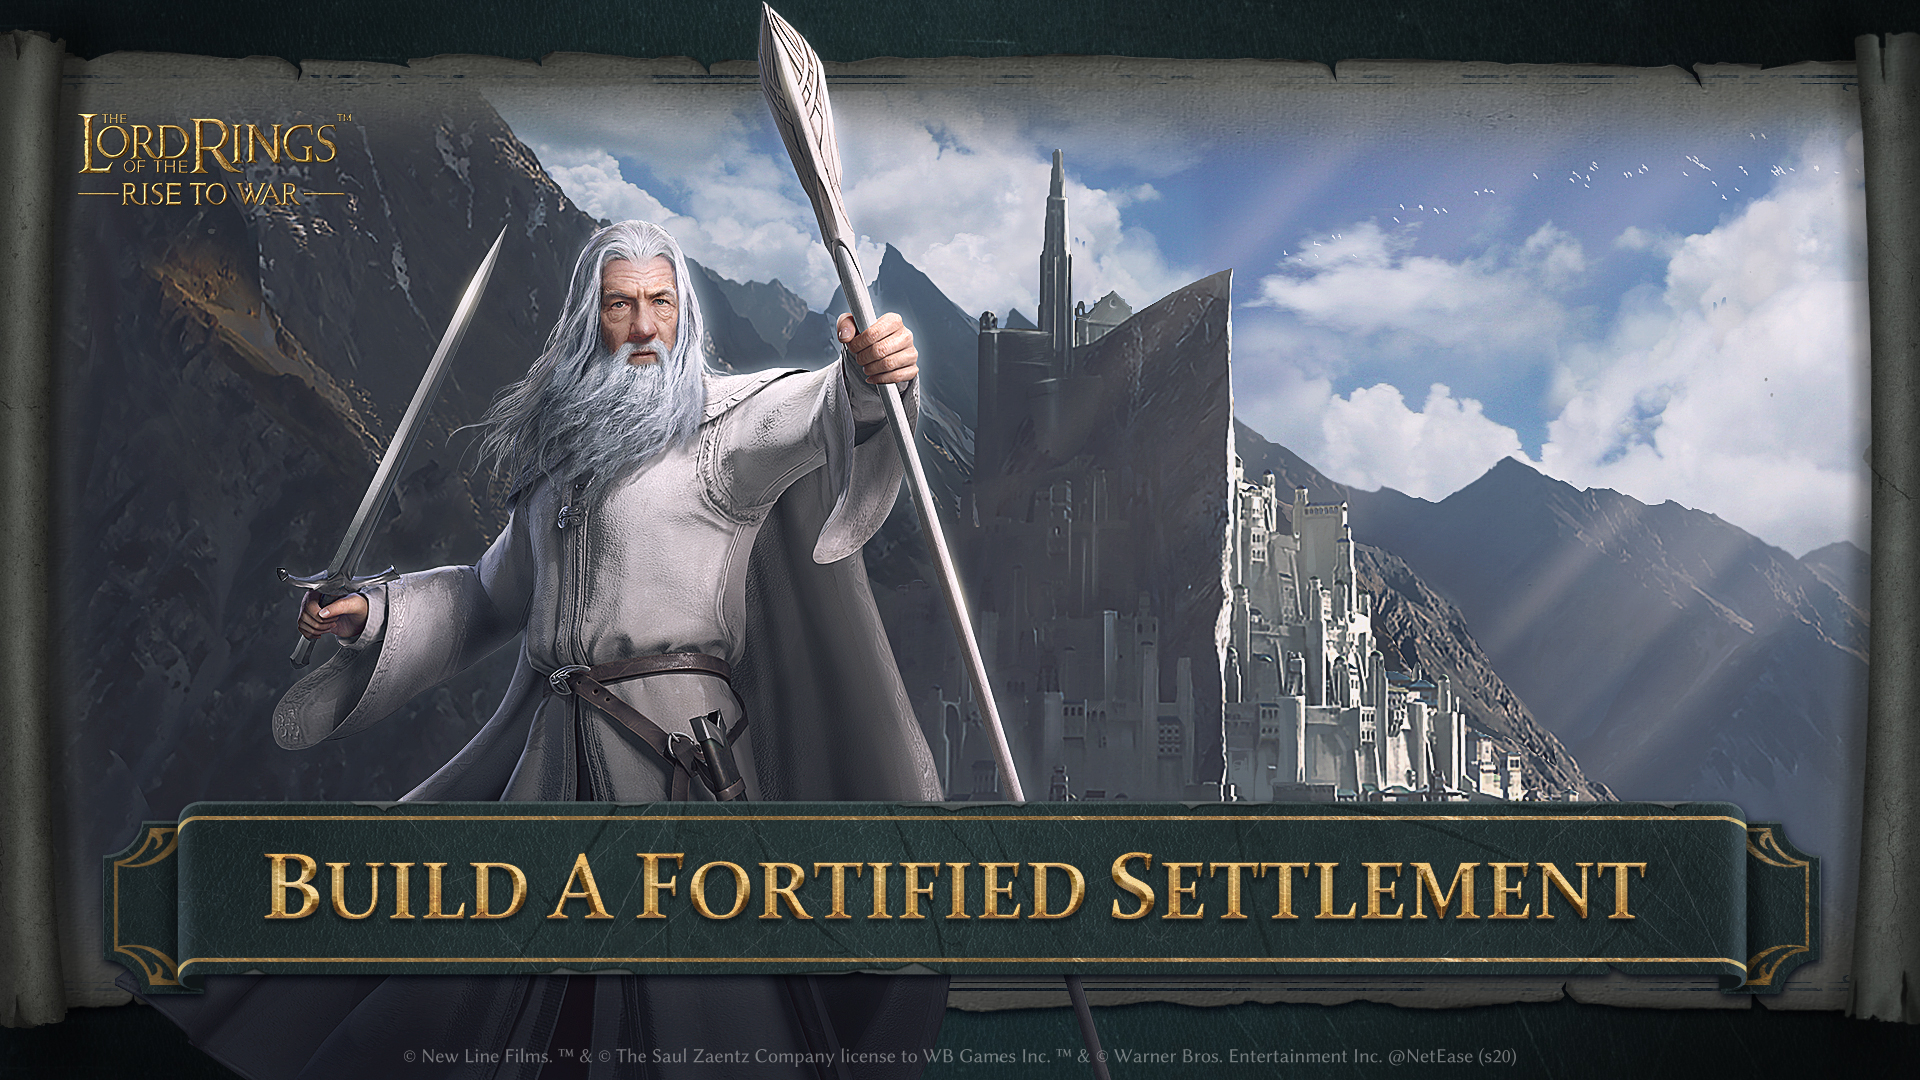 video game, the lord of the rings: rise to war, gandalf